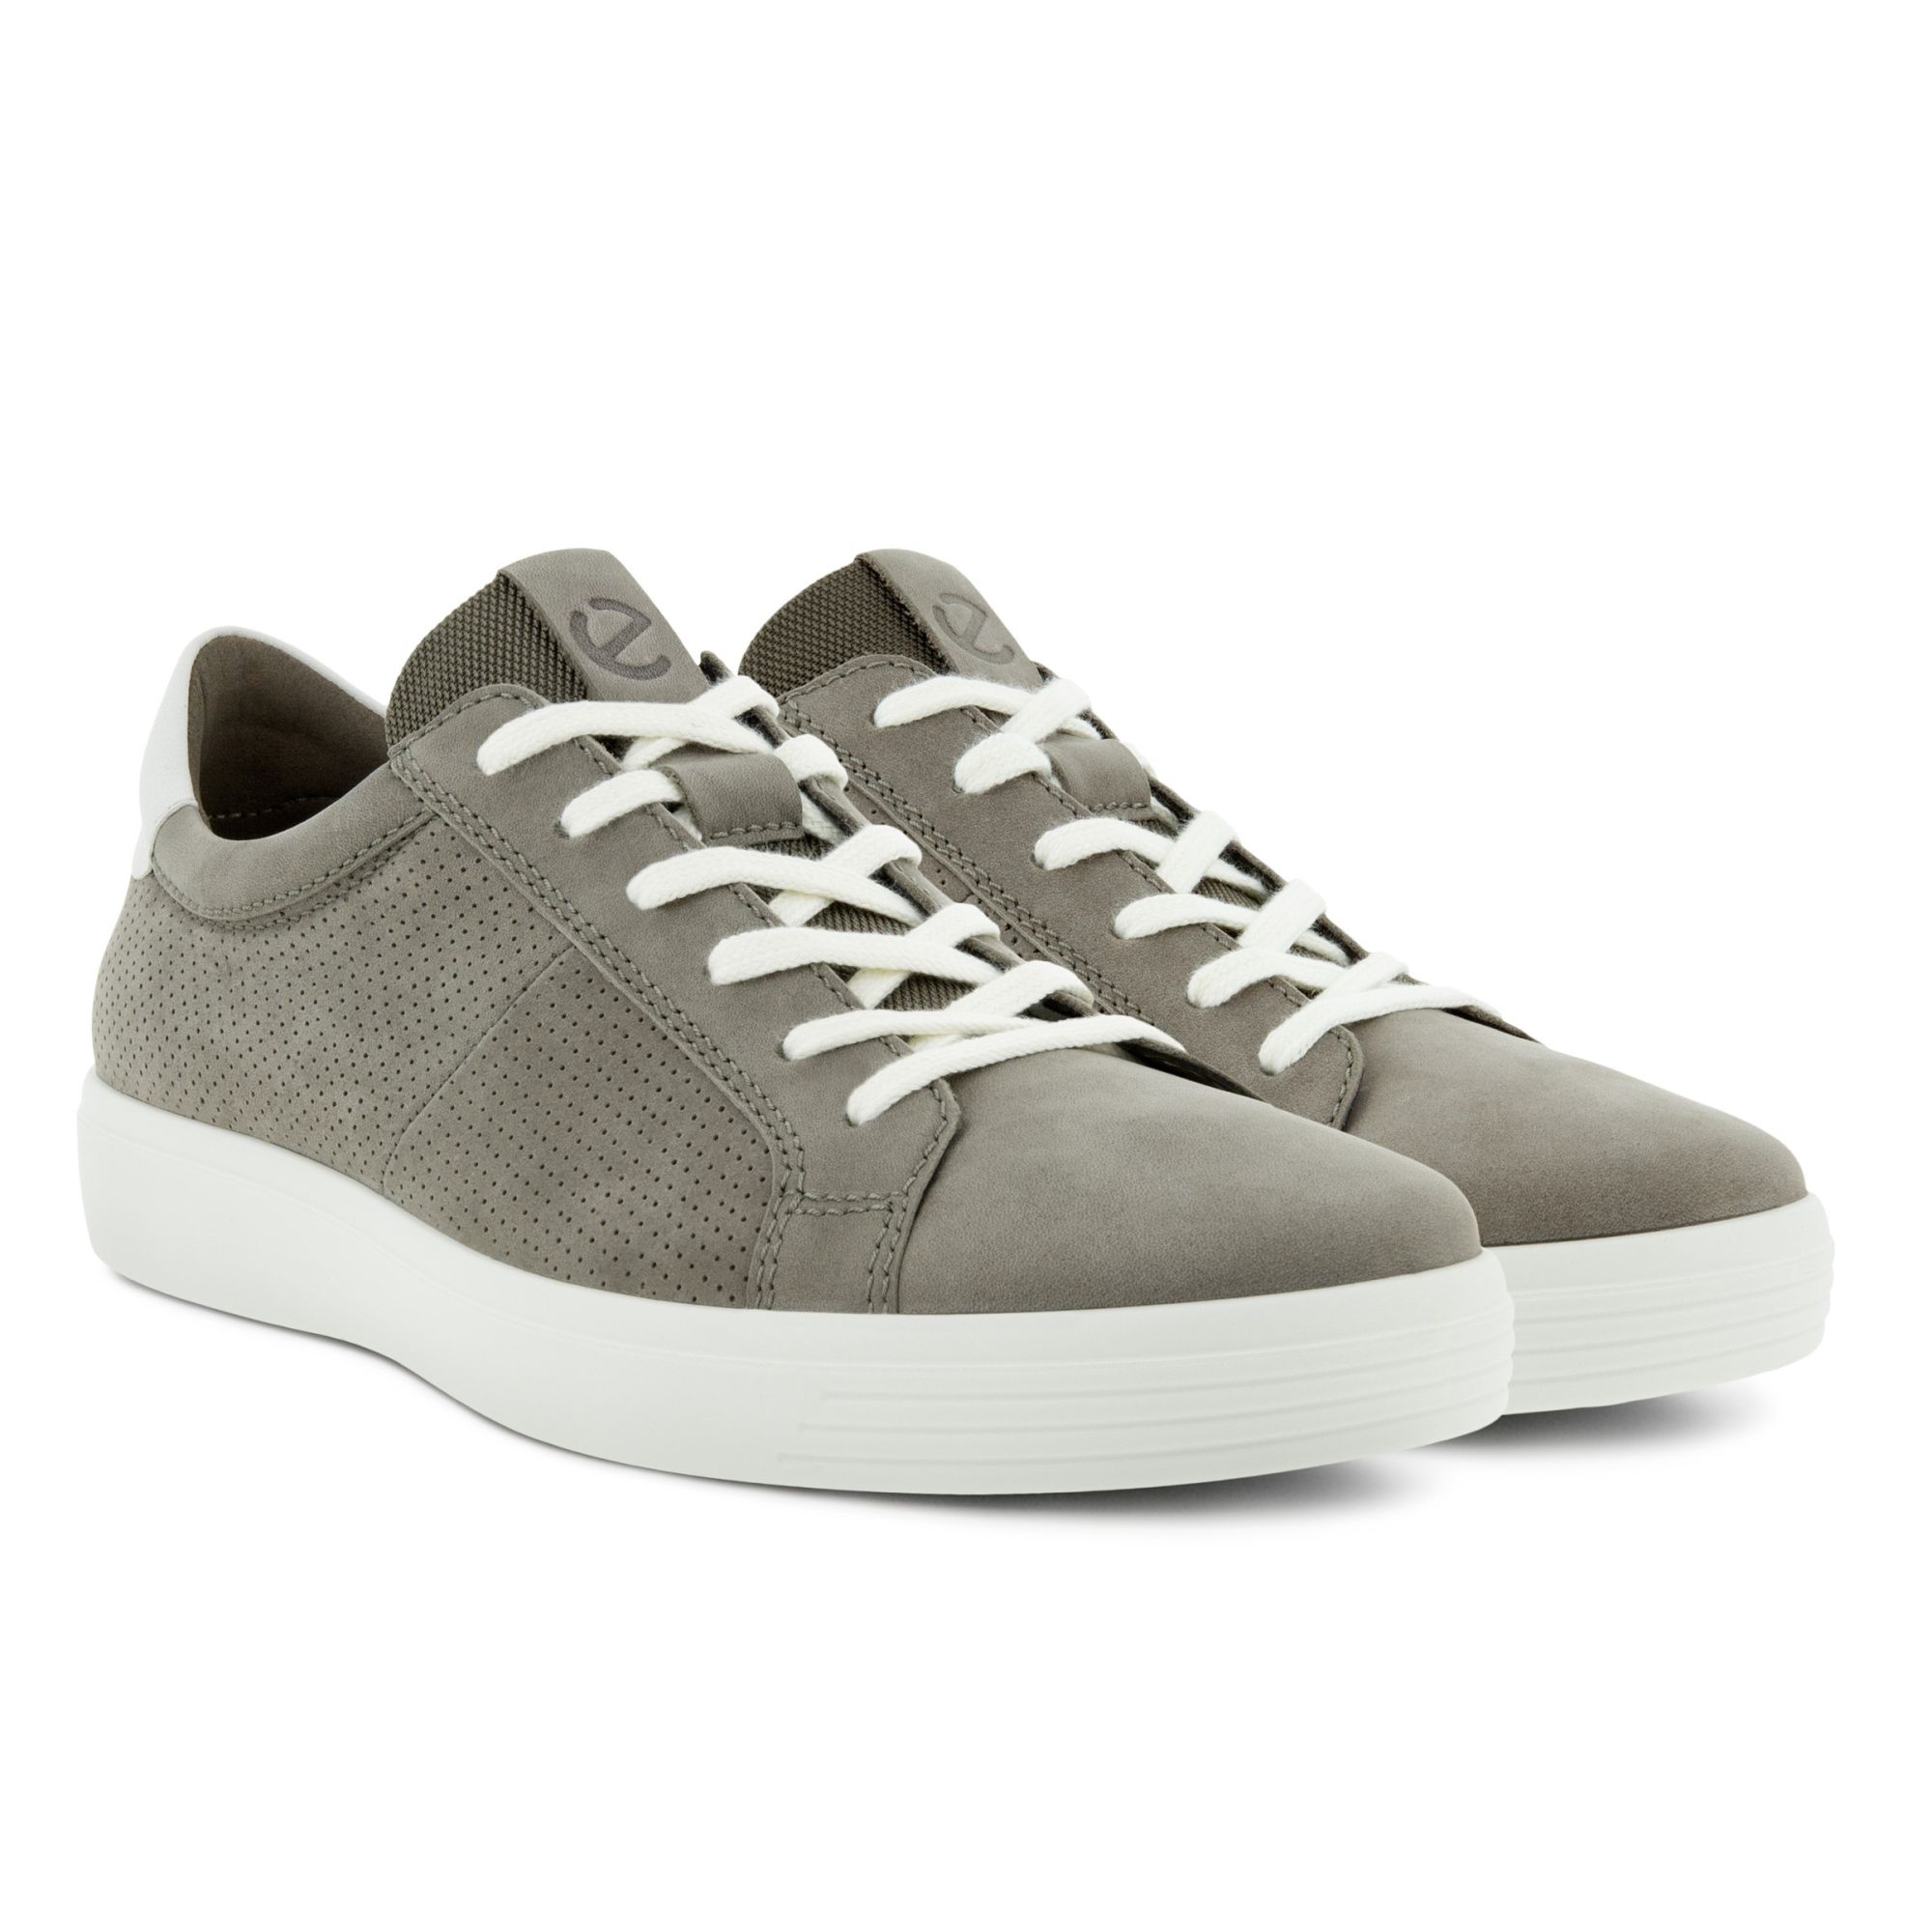 Ecco SOFT CLASSIC M Laced Shoe 43 - Products - Veryk Mall - Veryk